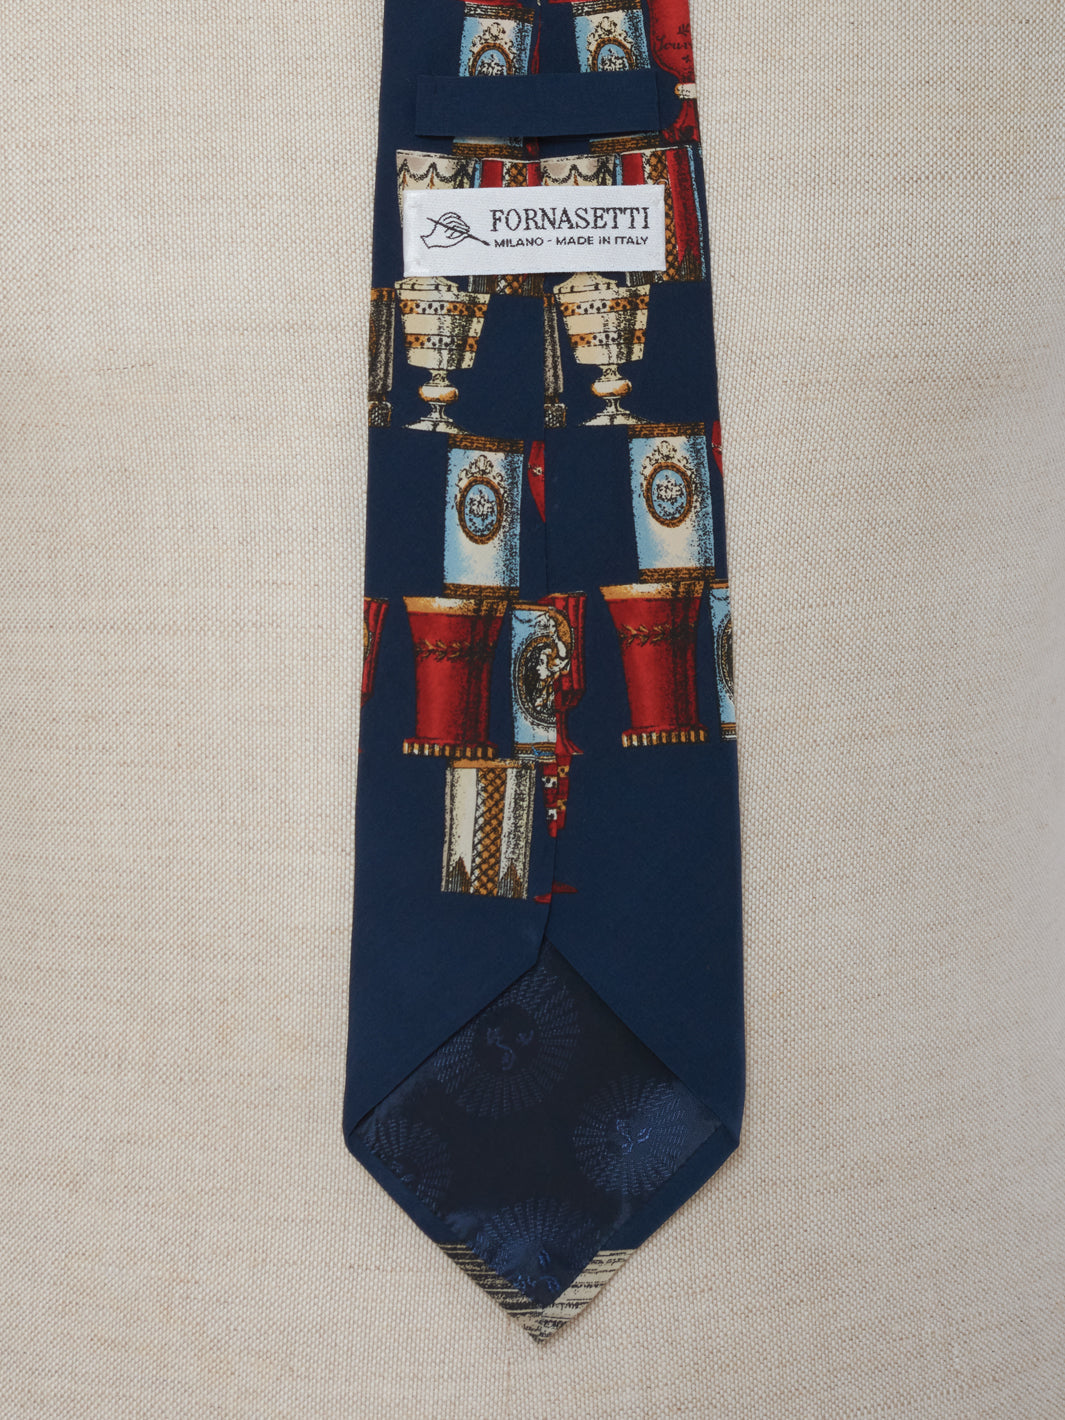 Fornasetti Silk Tie with Glasses Print